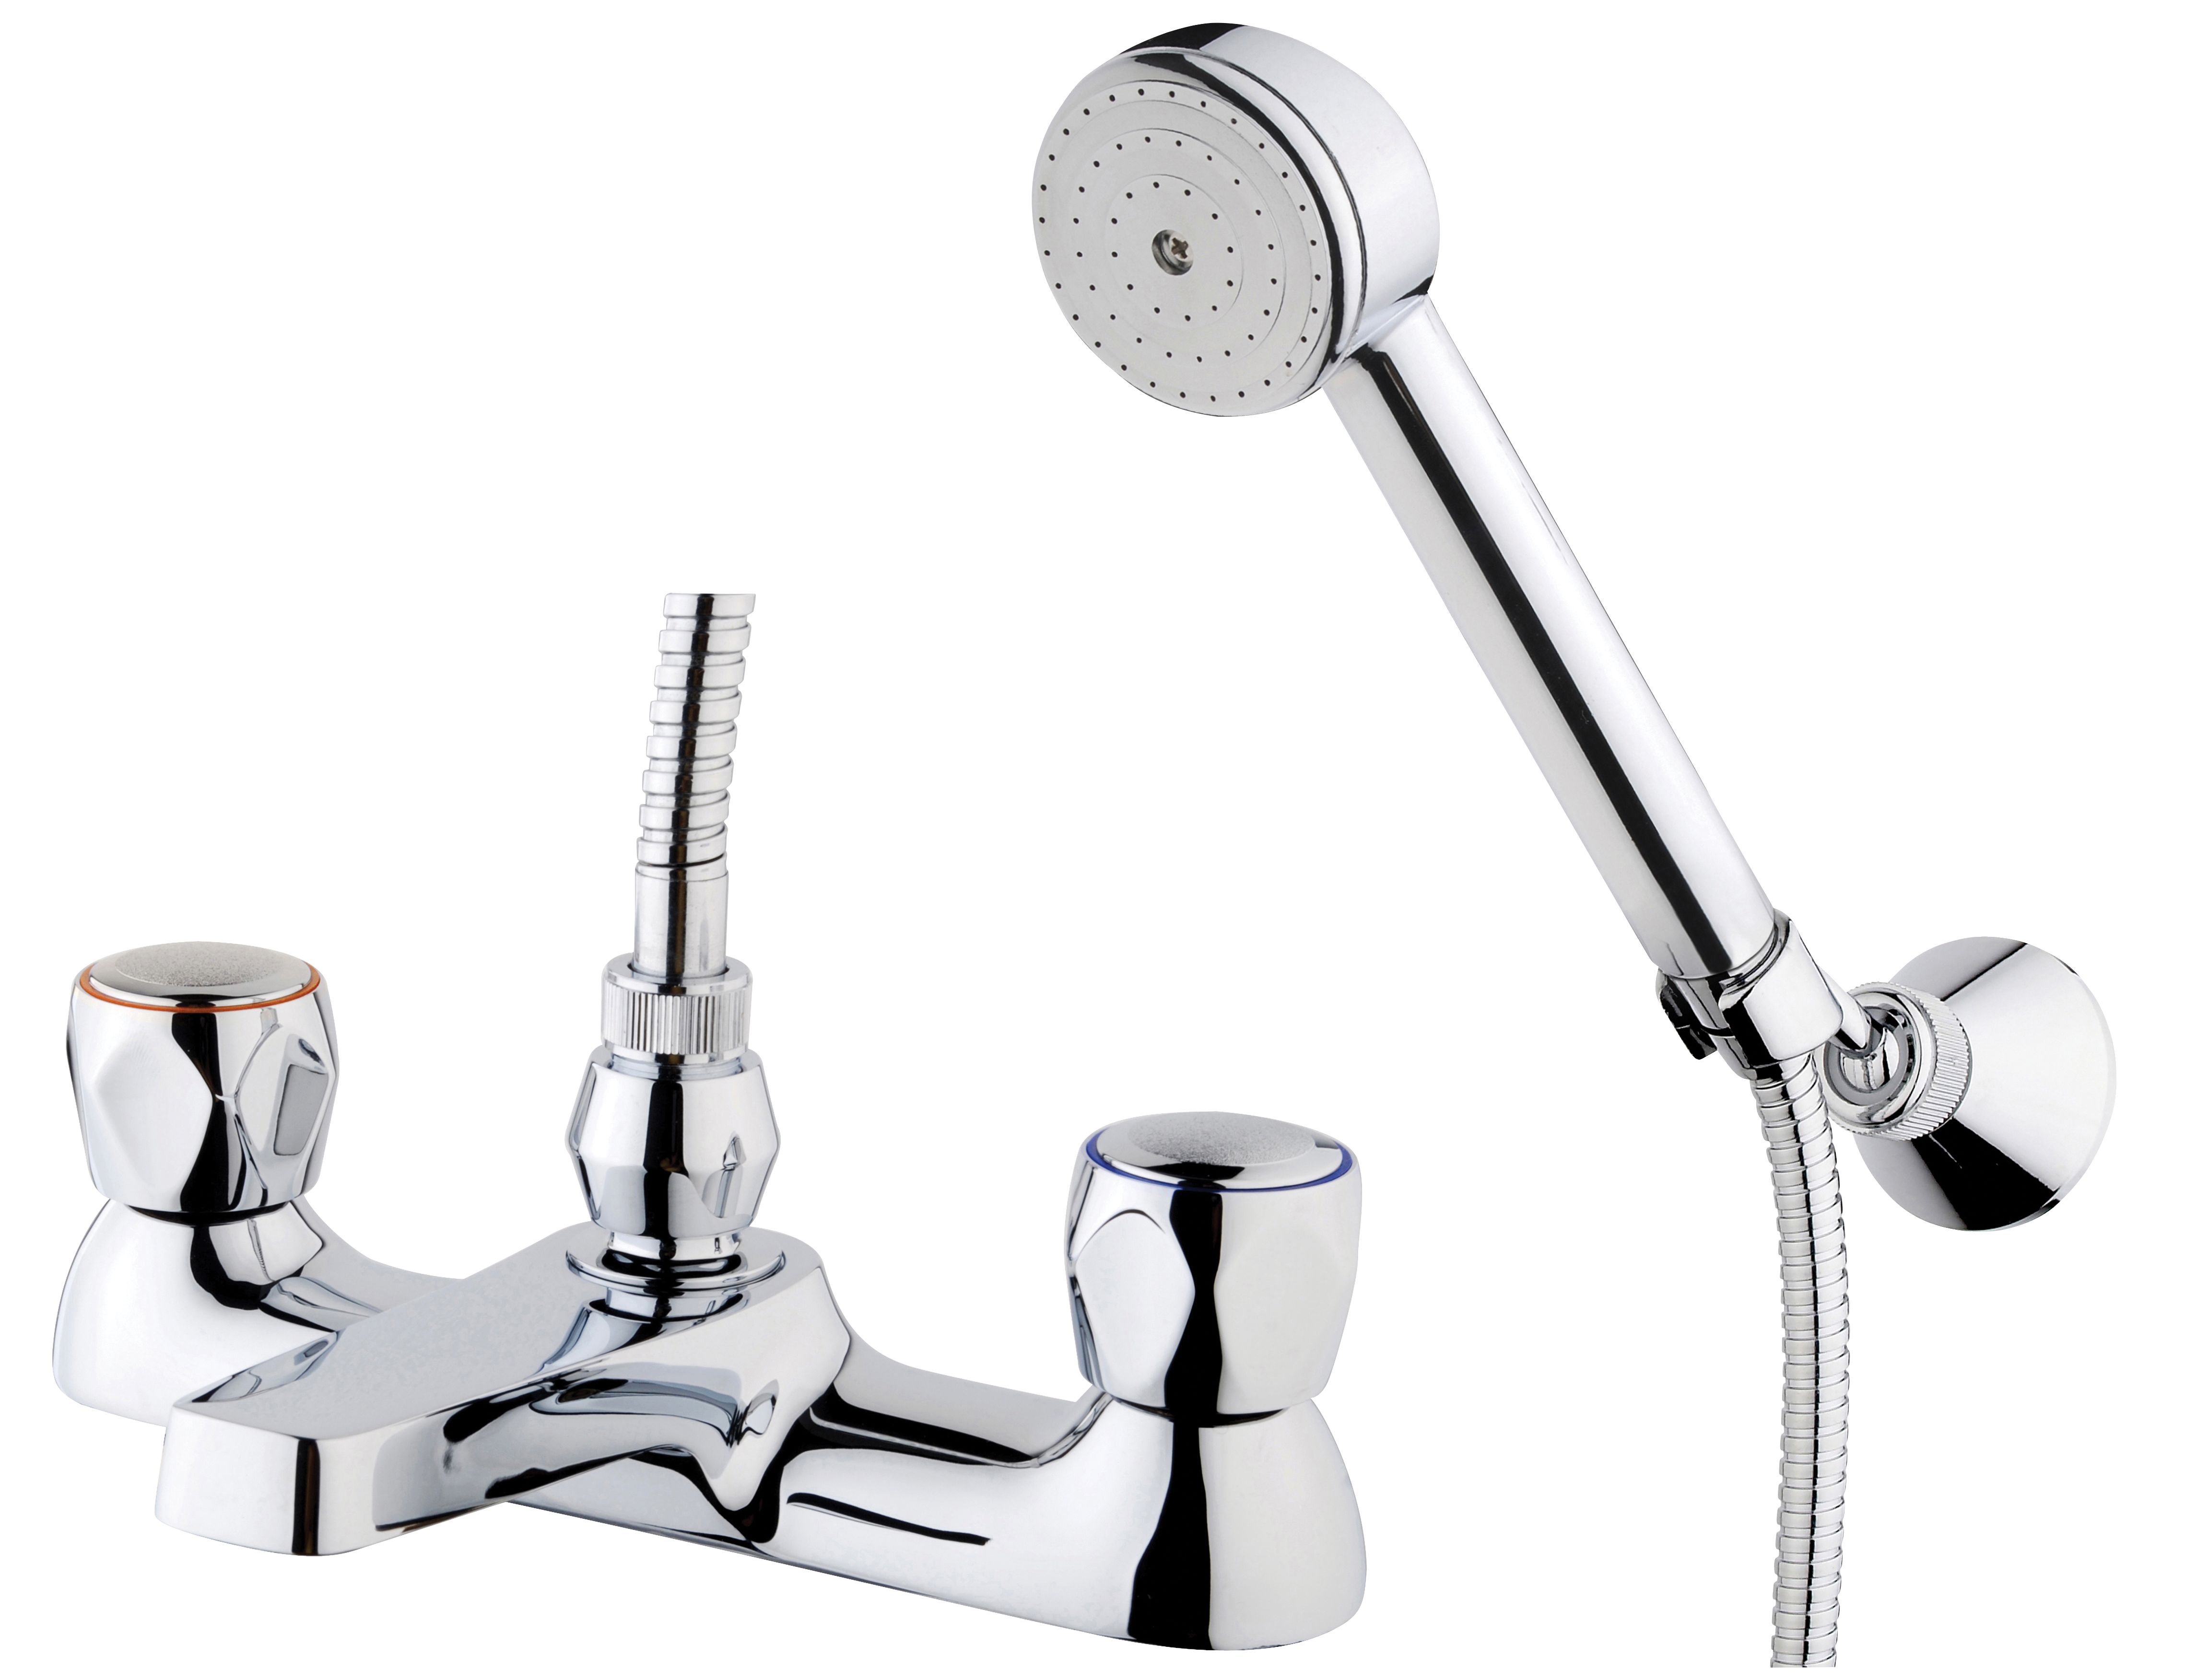 Image of Wickes Trade Chrome Bath Shower Mixer Tap